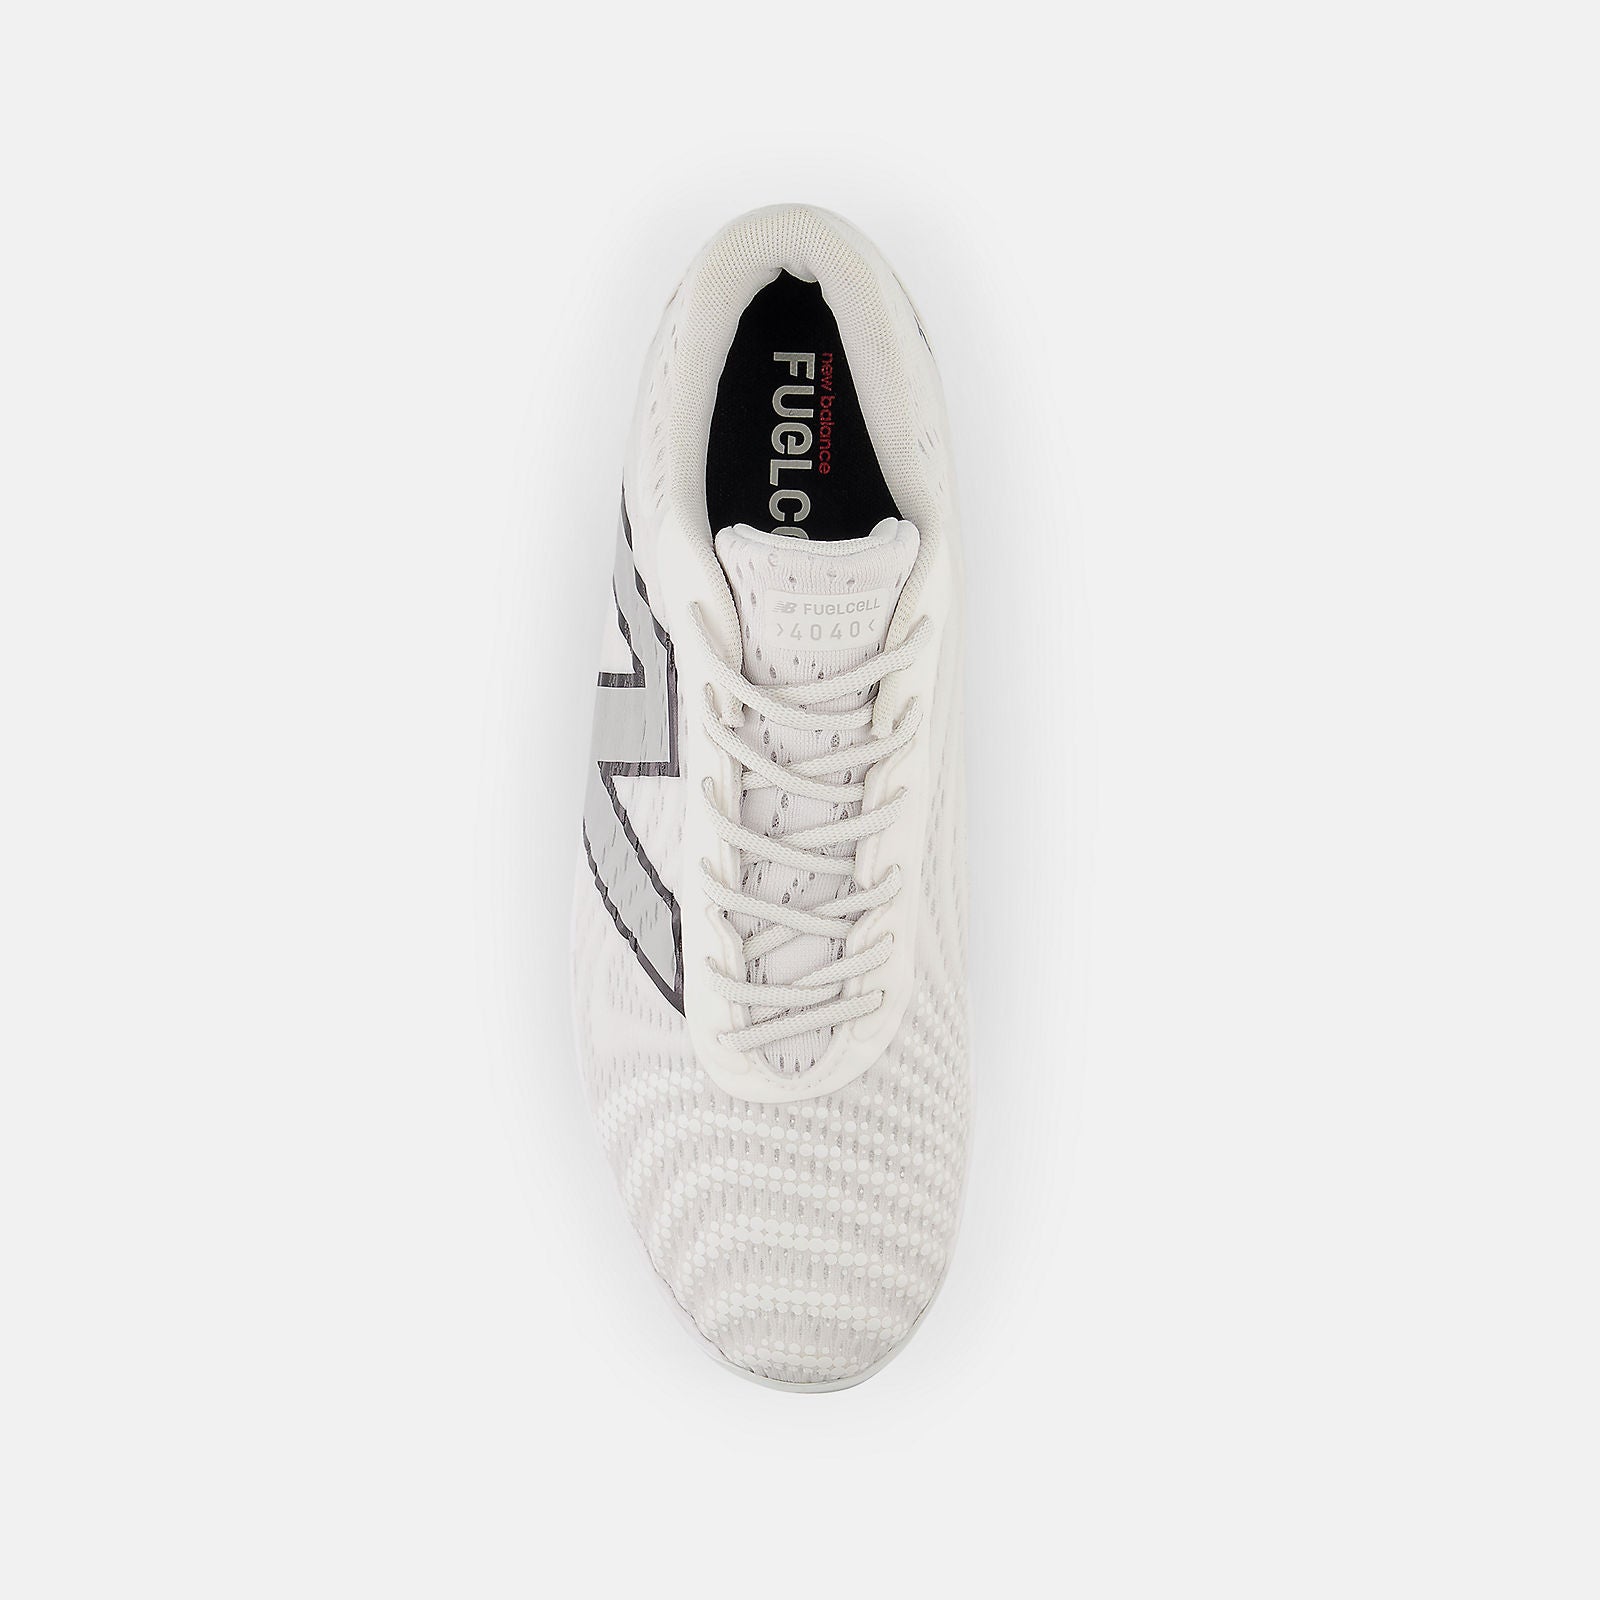 New Balance White PL4040W7 Molded Cleats